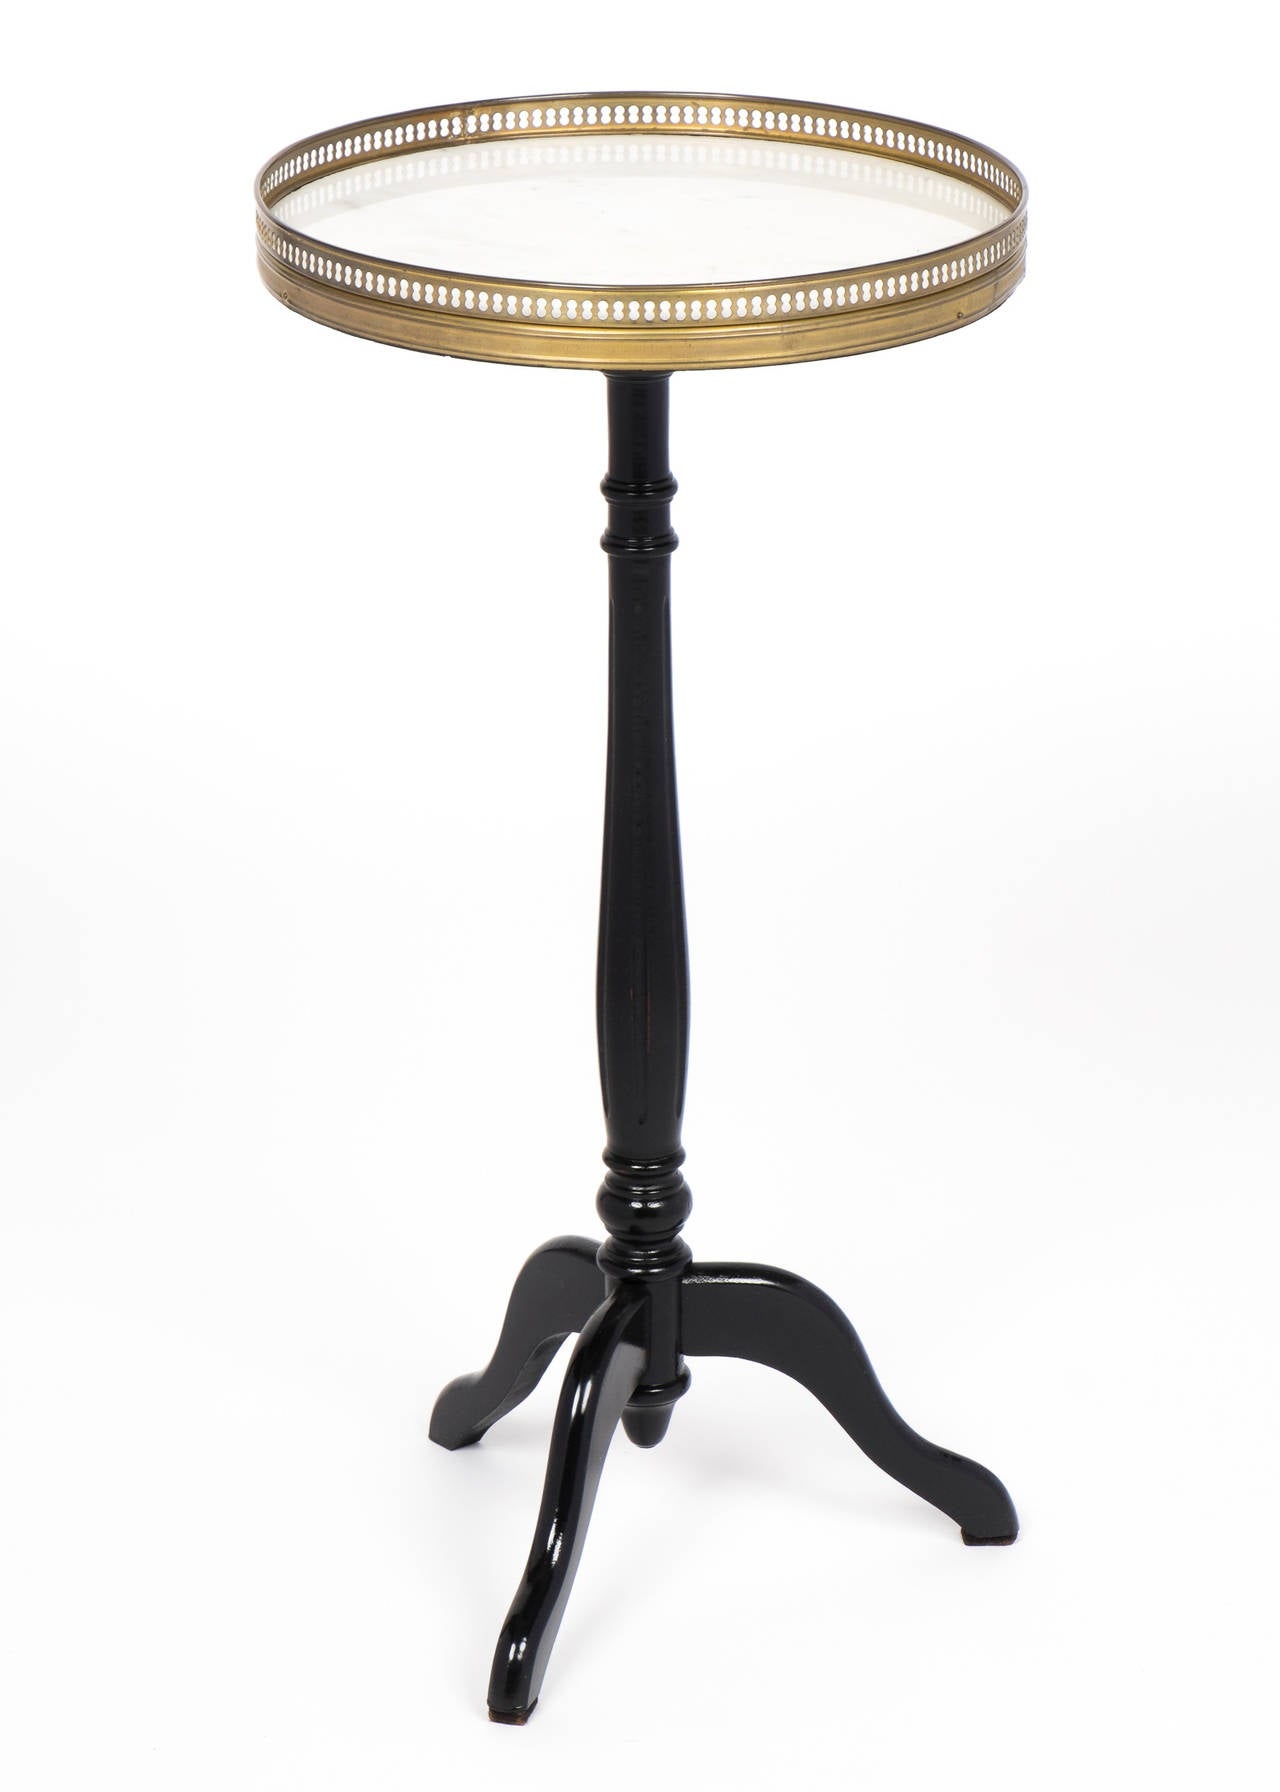 French Louis XVI style side table with an ebonized tripod base, French polished to a high gloss, and Carrara marble-top surrounded by a finely cast brass gallery. A comely perch for your drink or book.